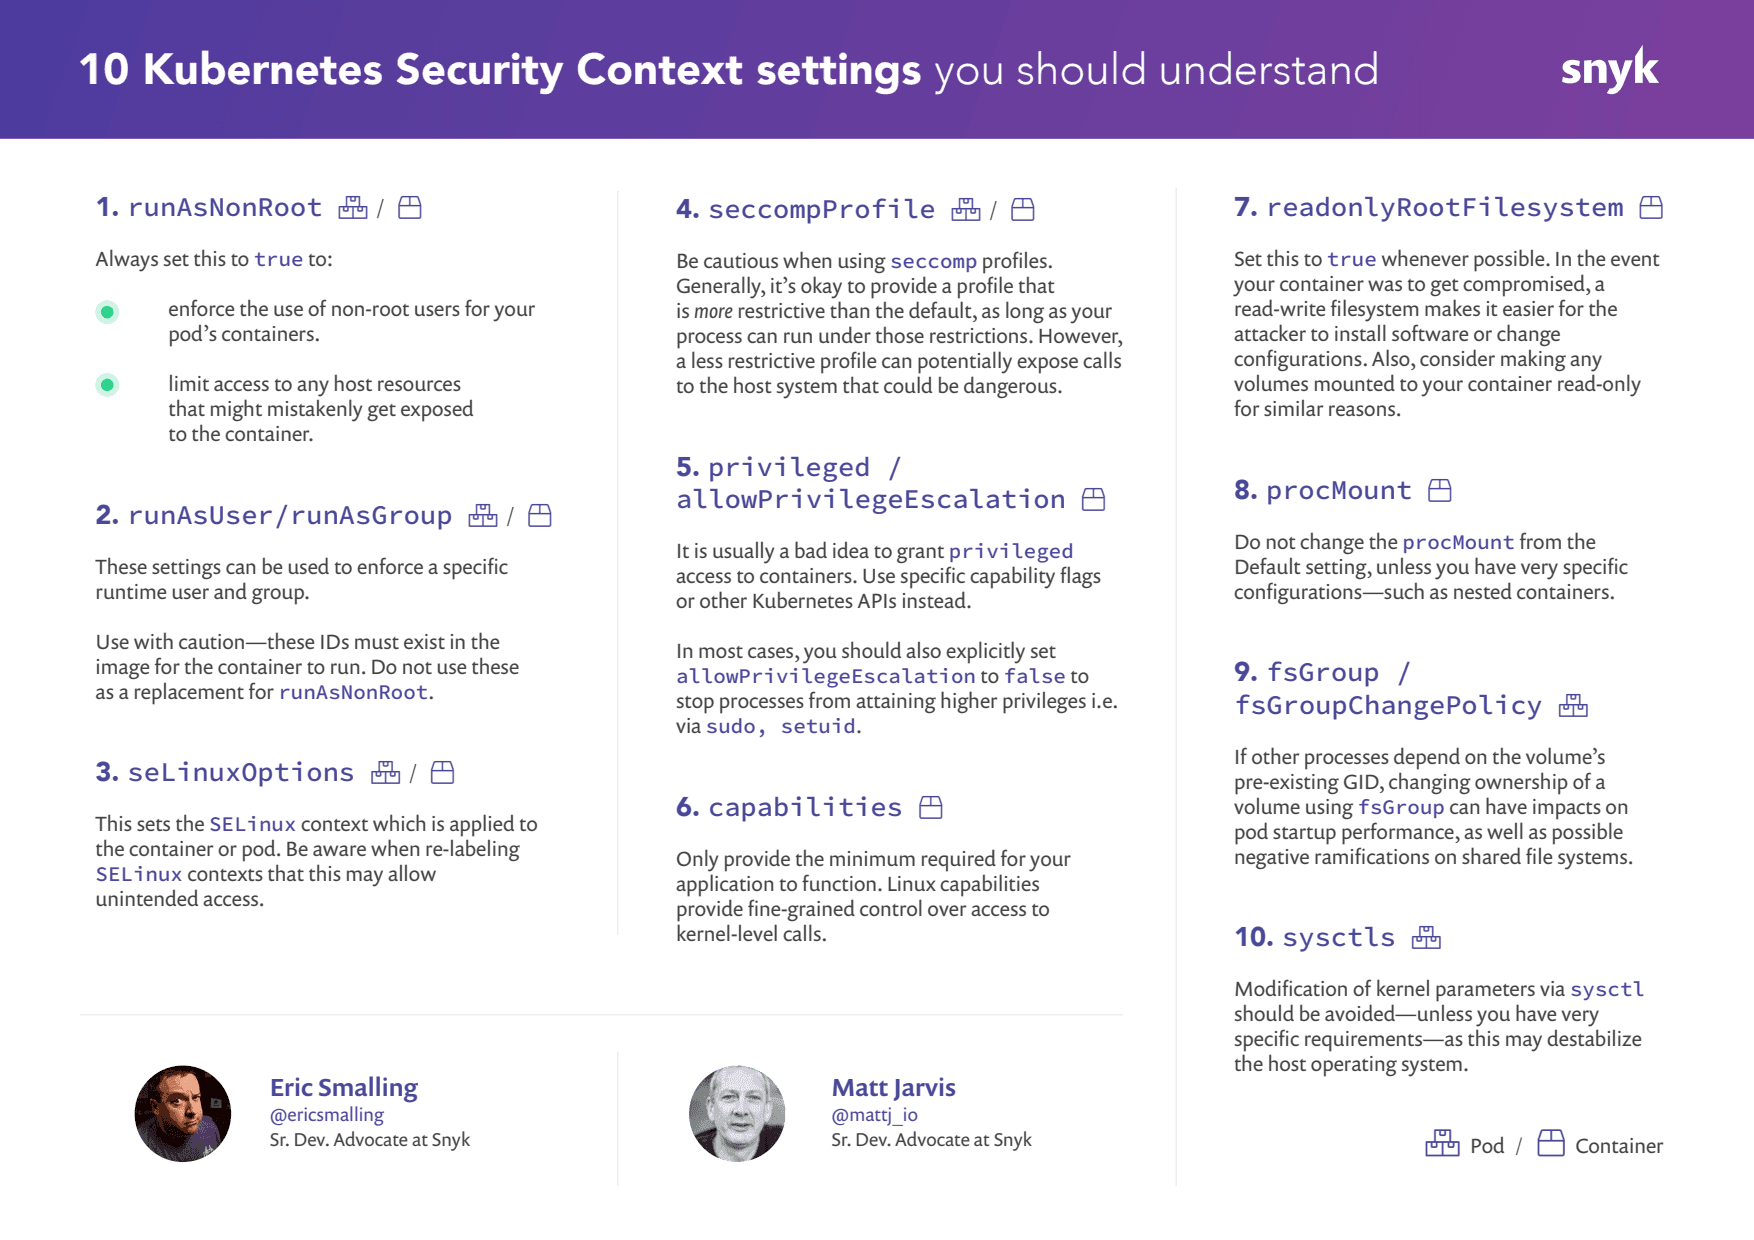 wordpress-sync/10-Kubernetes-Security-Context-settings-you-should-understand